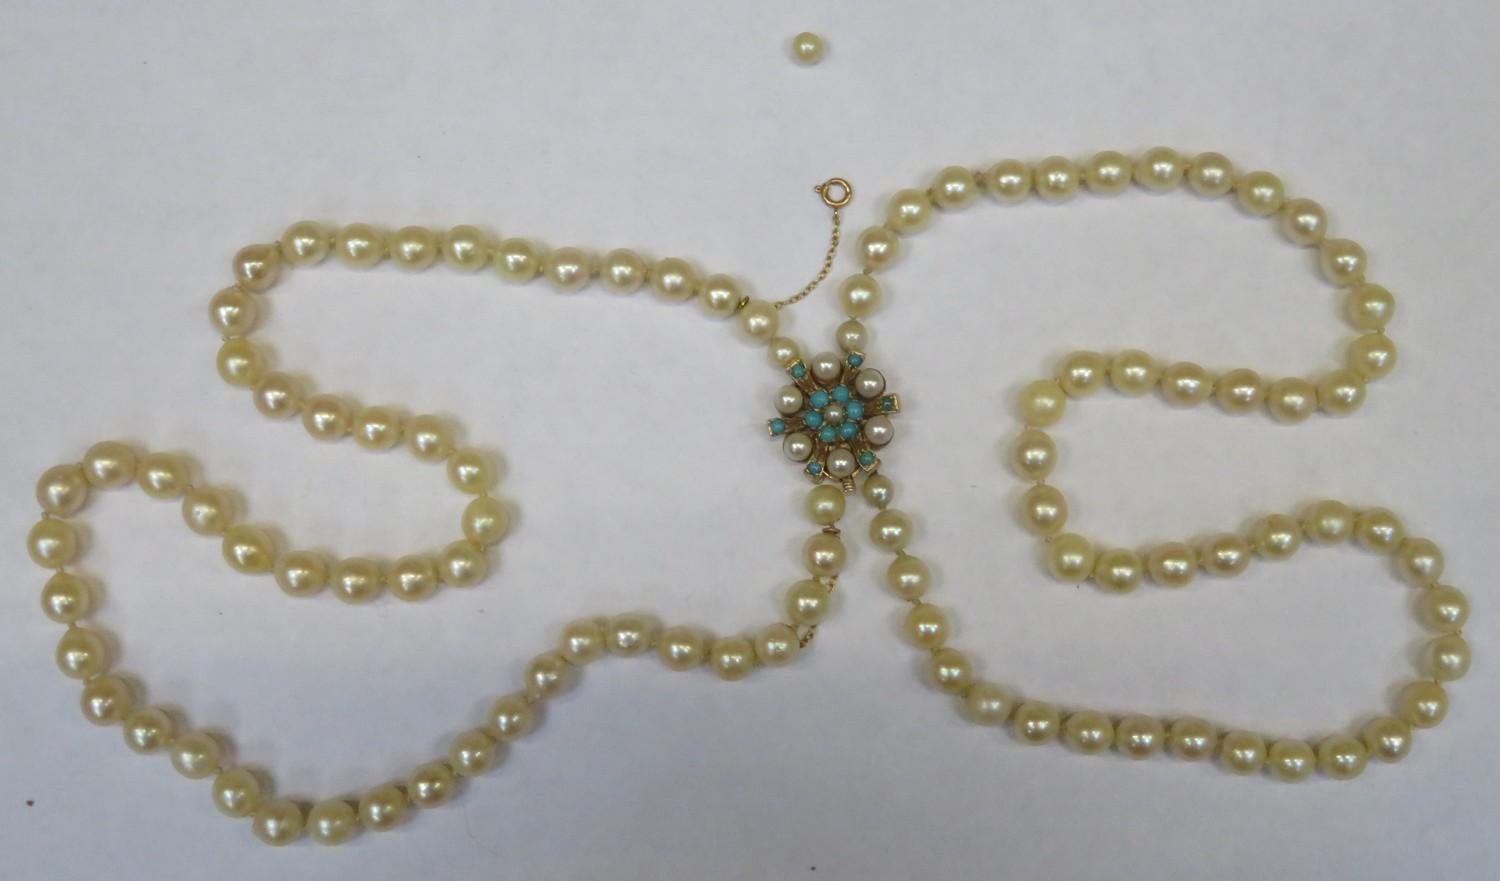 Cased double strand of cultured Ciro pearls, with 9ct gold clasp, set with pearls and turquoise